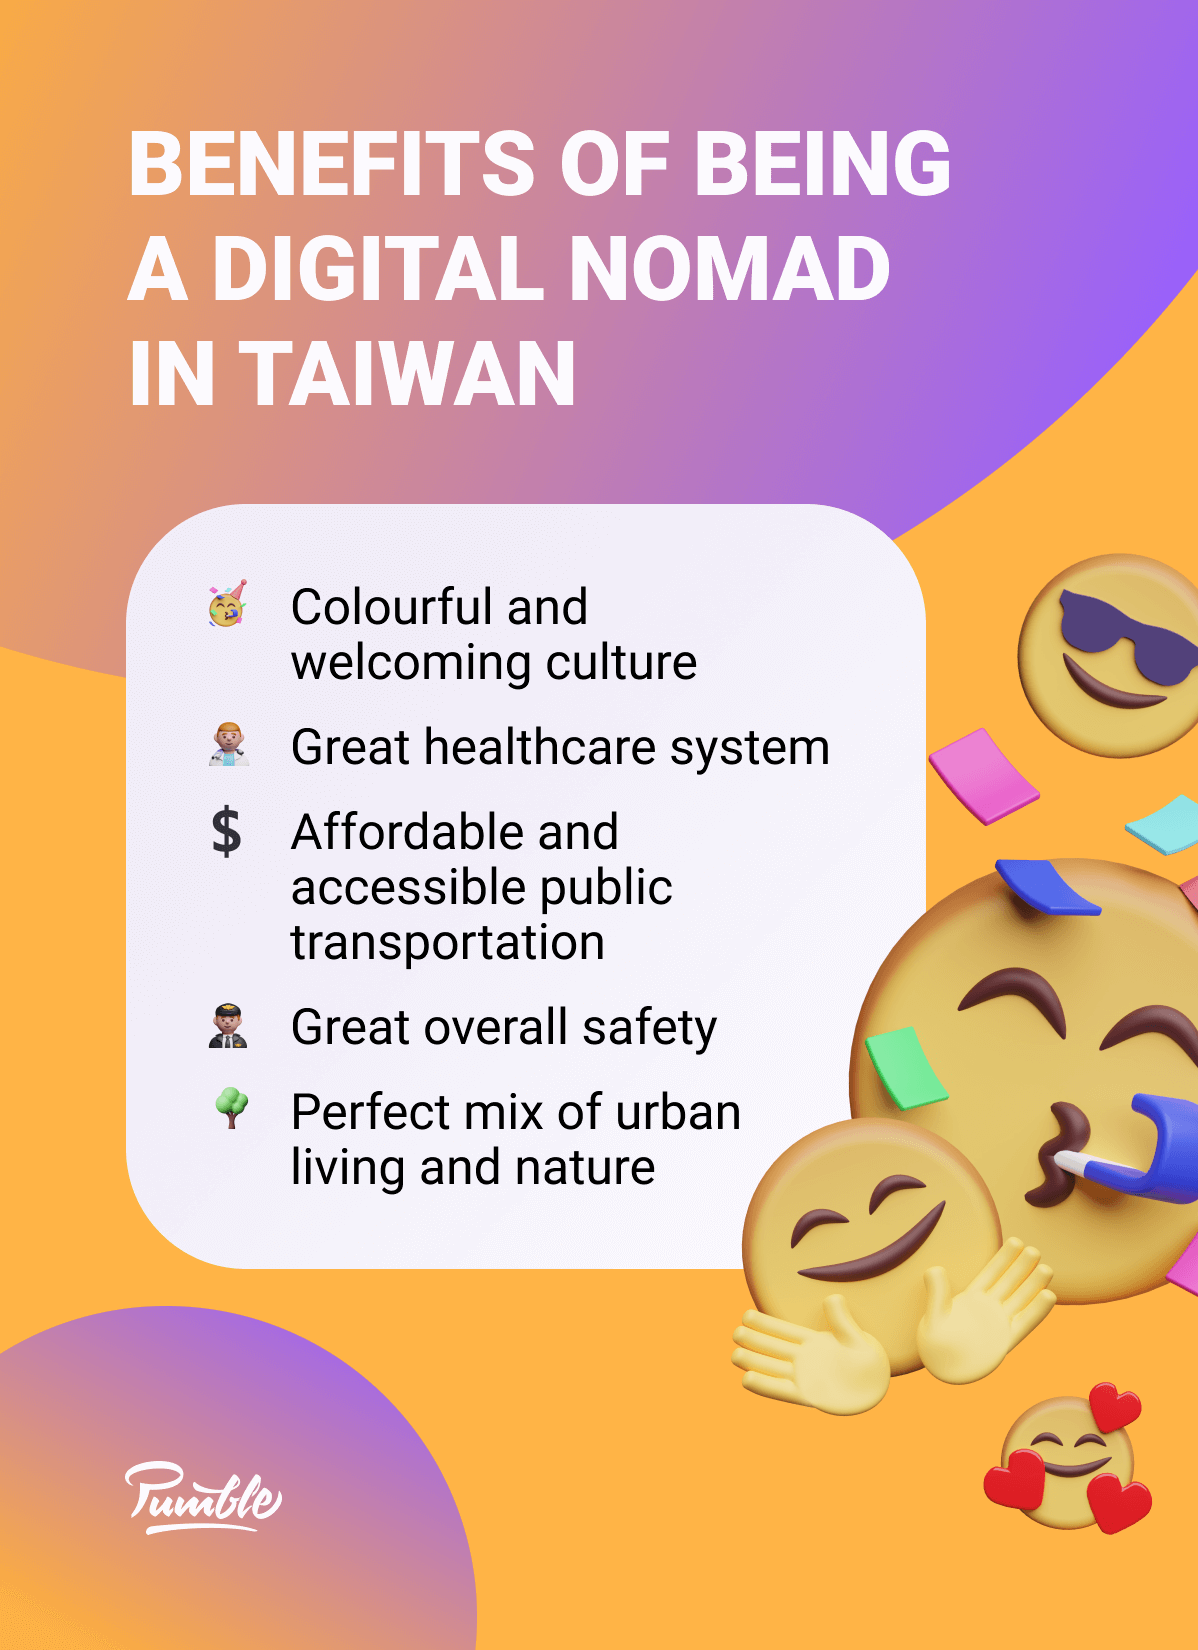 Benefits of being a digital nomad in Taiwan